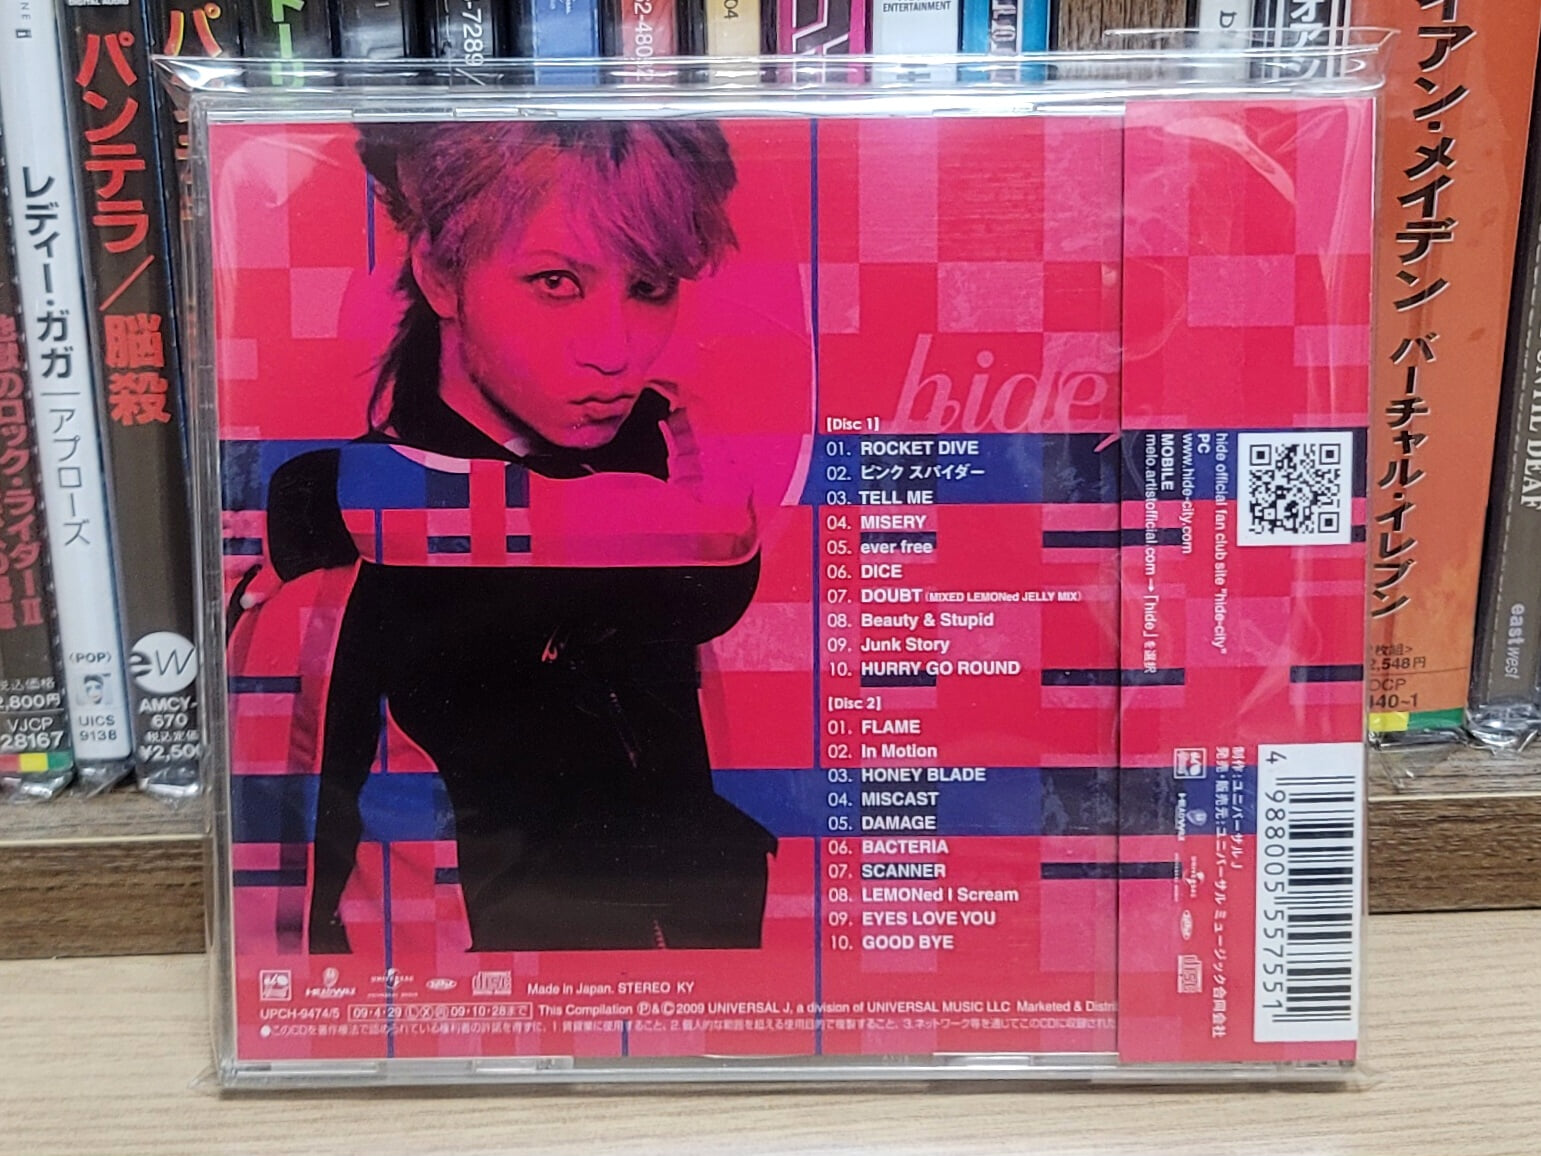 (2CD 일본반) Hide (히데) - We Love hide - The Best in The World